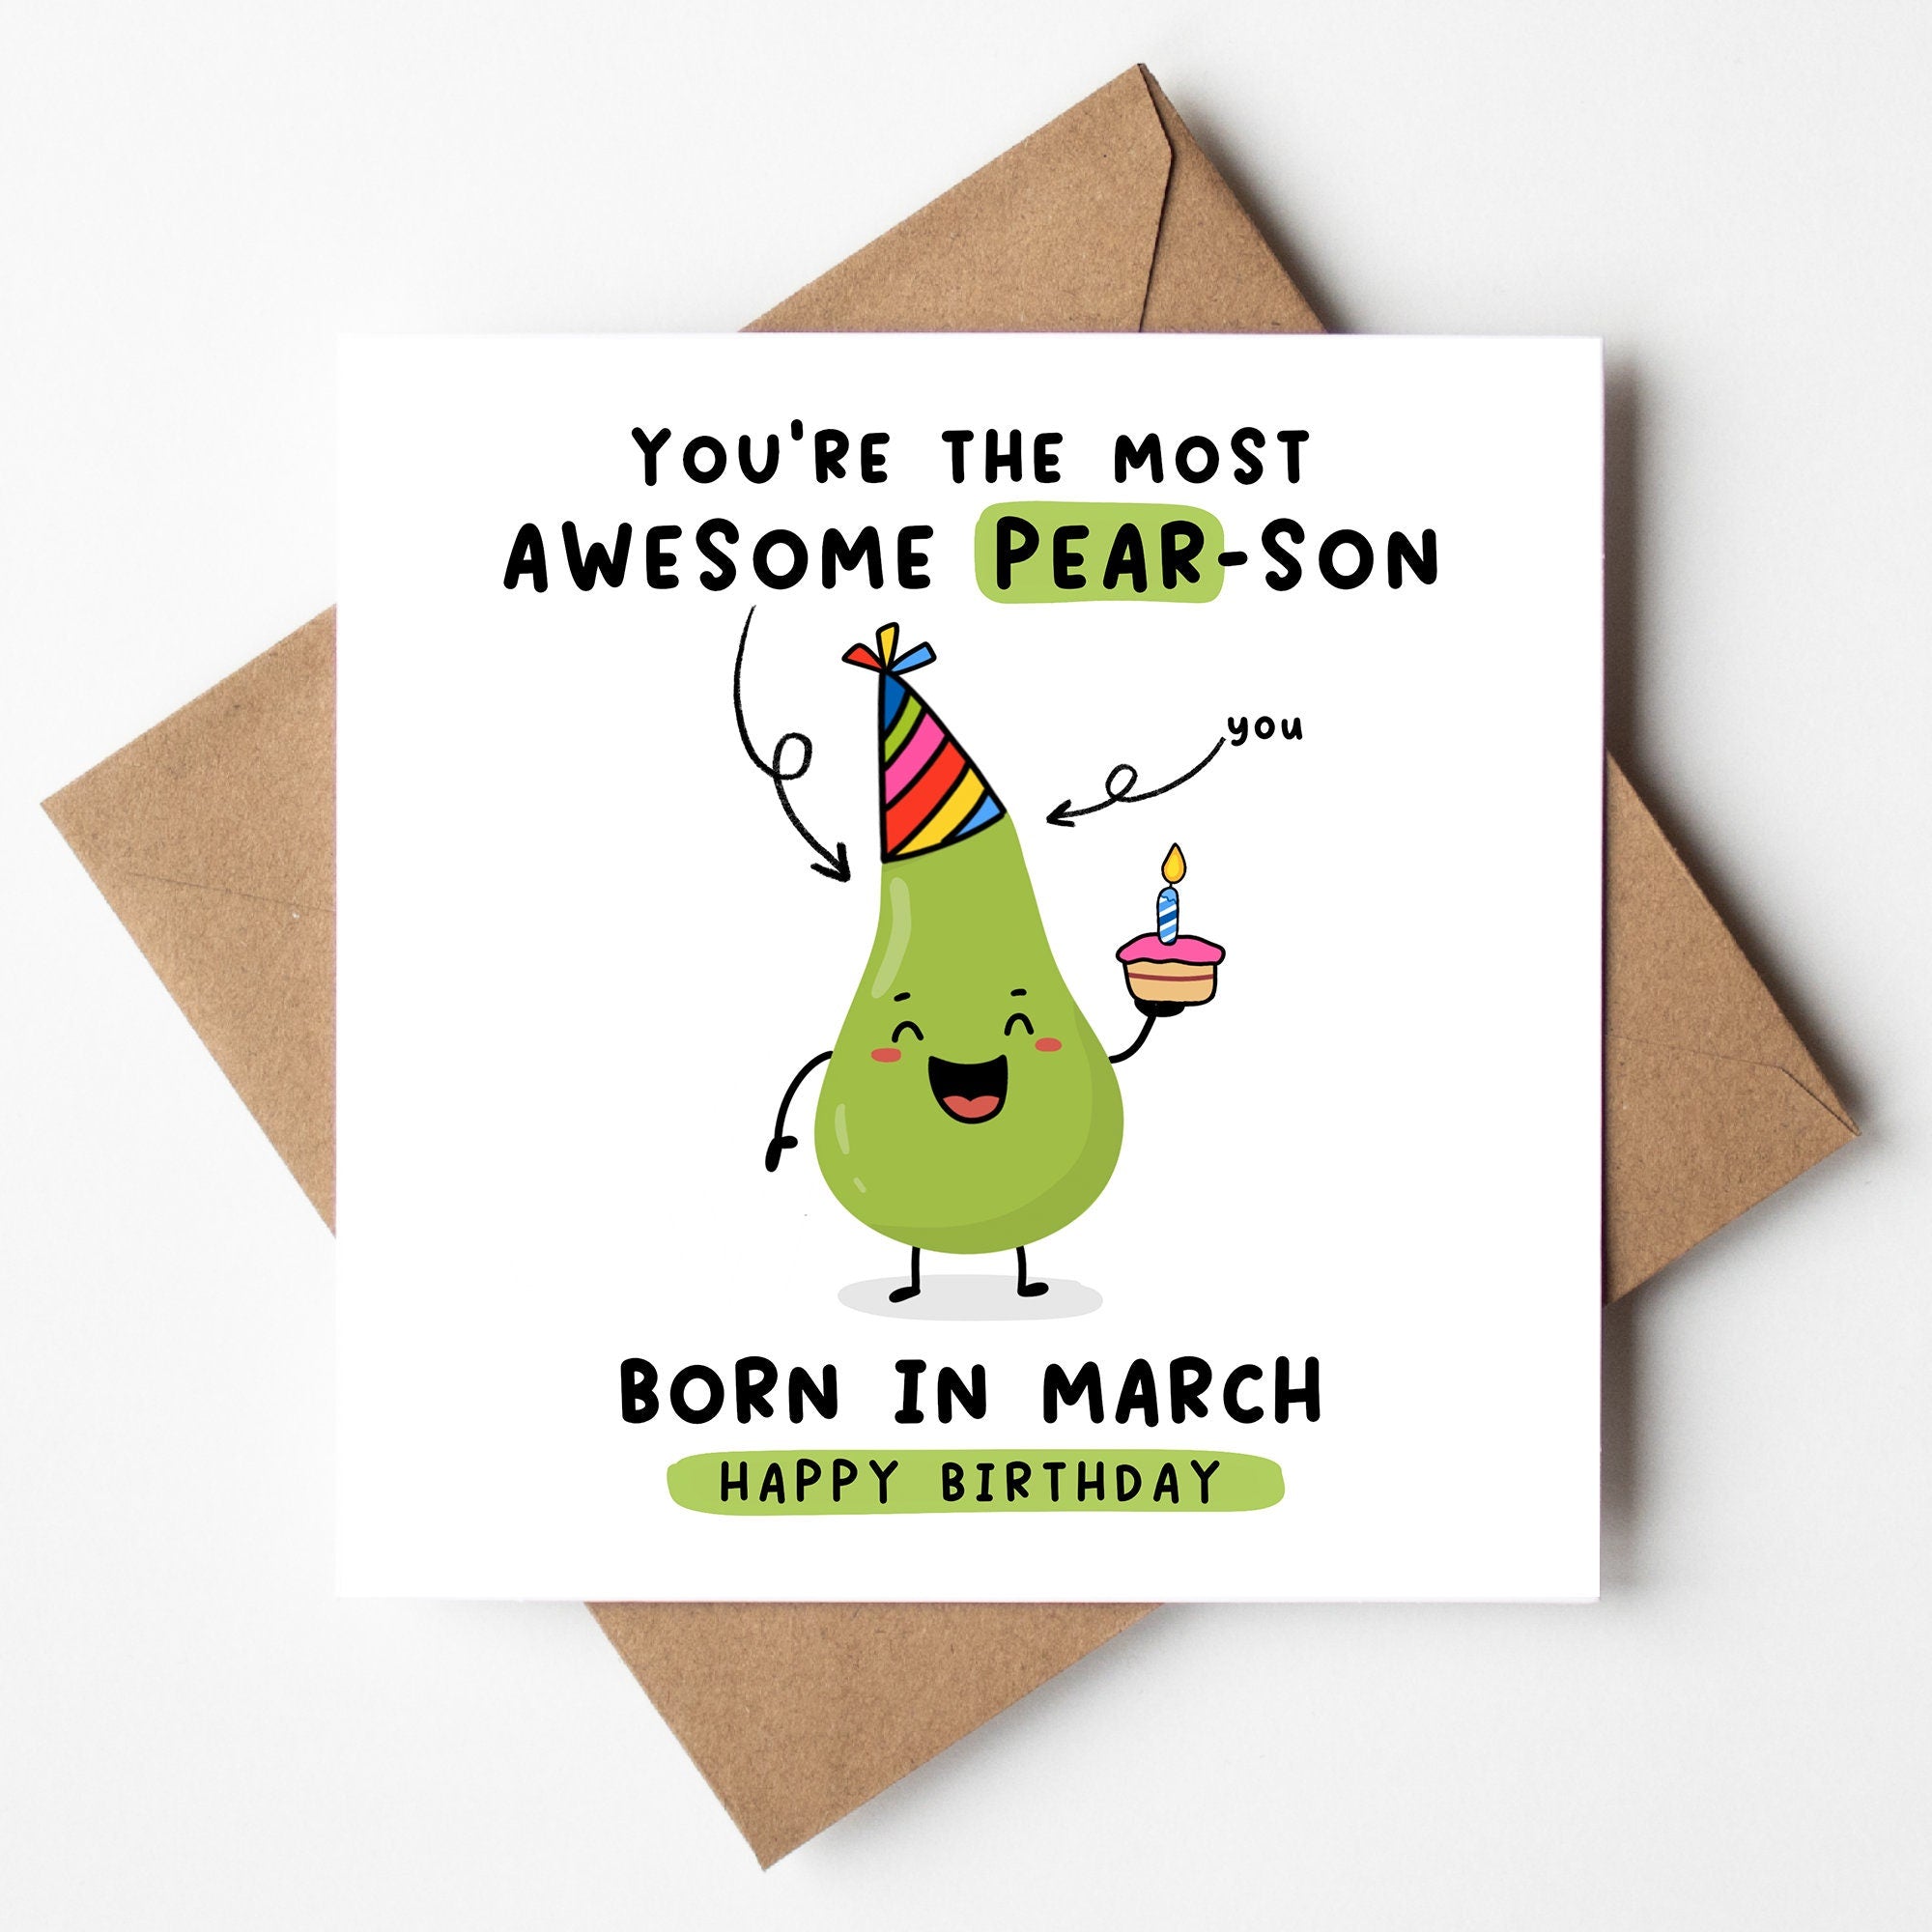 You're The Most Awesome Pear-son born in March, Funny Pun Card, Pear Pun Card, Born In March, Birth Month Card March